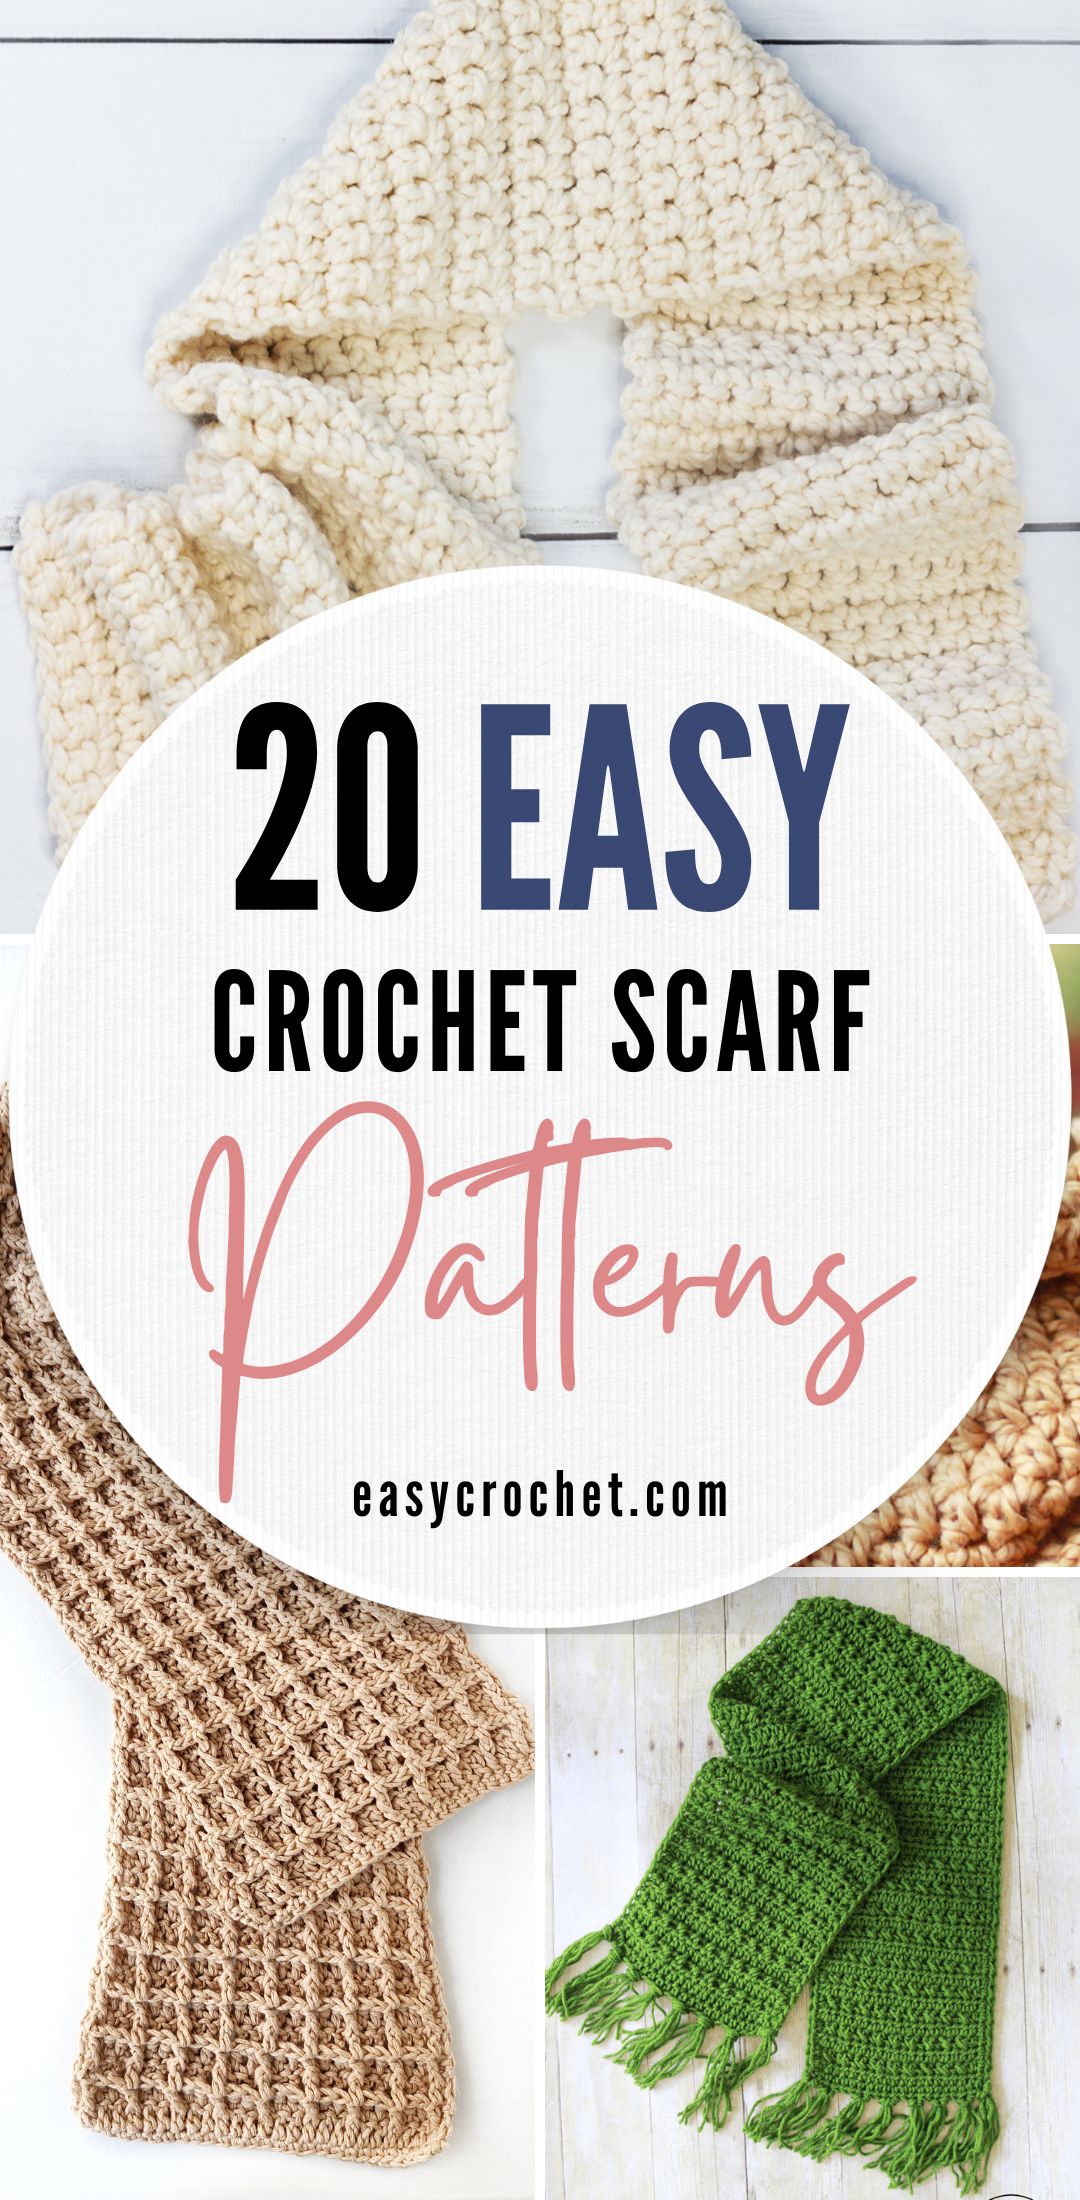 Easy Crochet Scarf Patterns for Beginners to Make! 